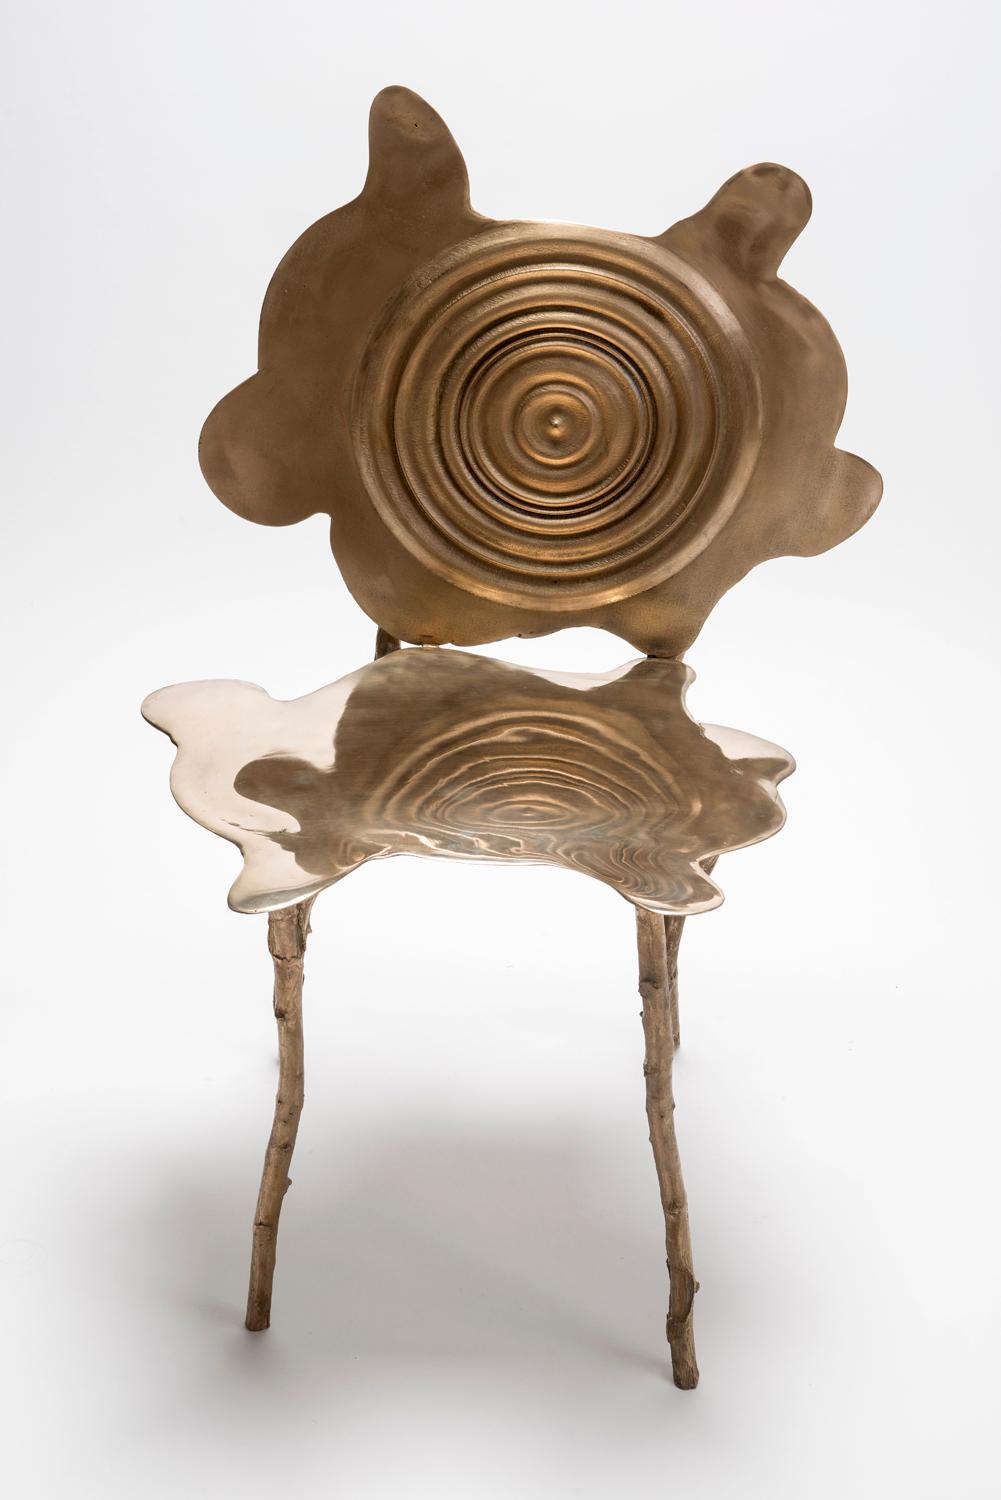 Gregory Nangle
Ripple Rorschach chair, 2018
Low polish cast bronze
Measures: 37 x 23.5 x 21 in.